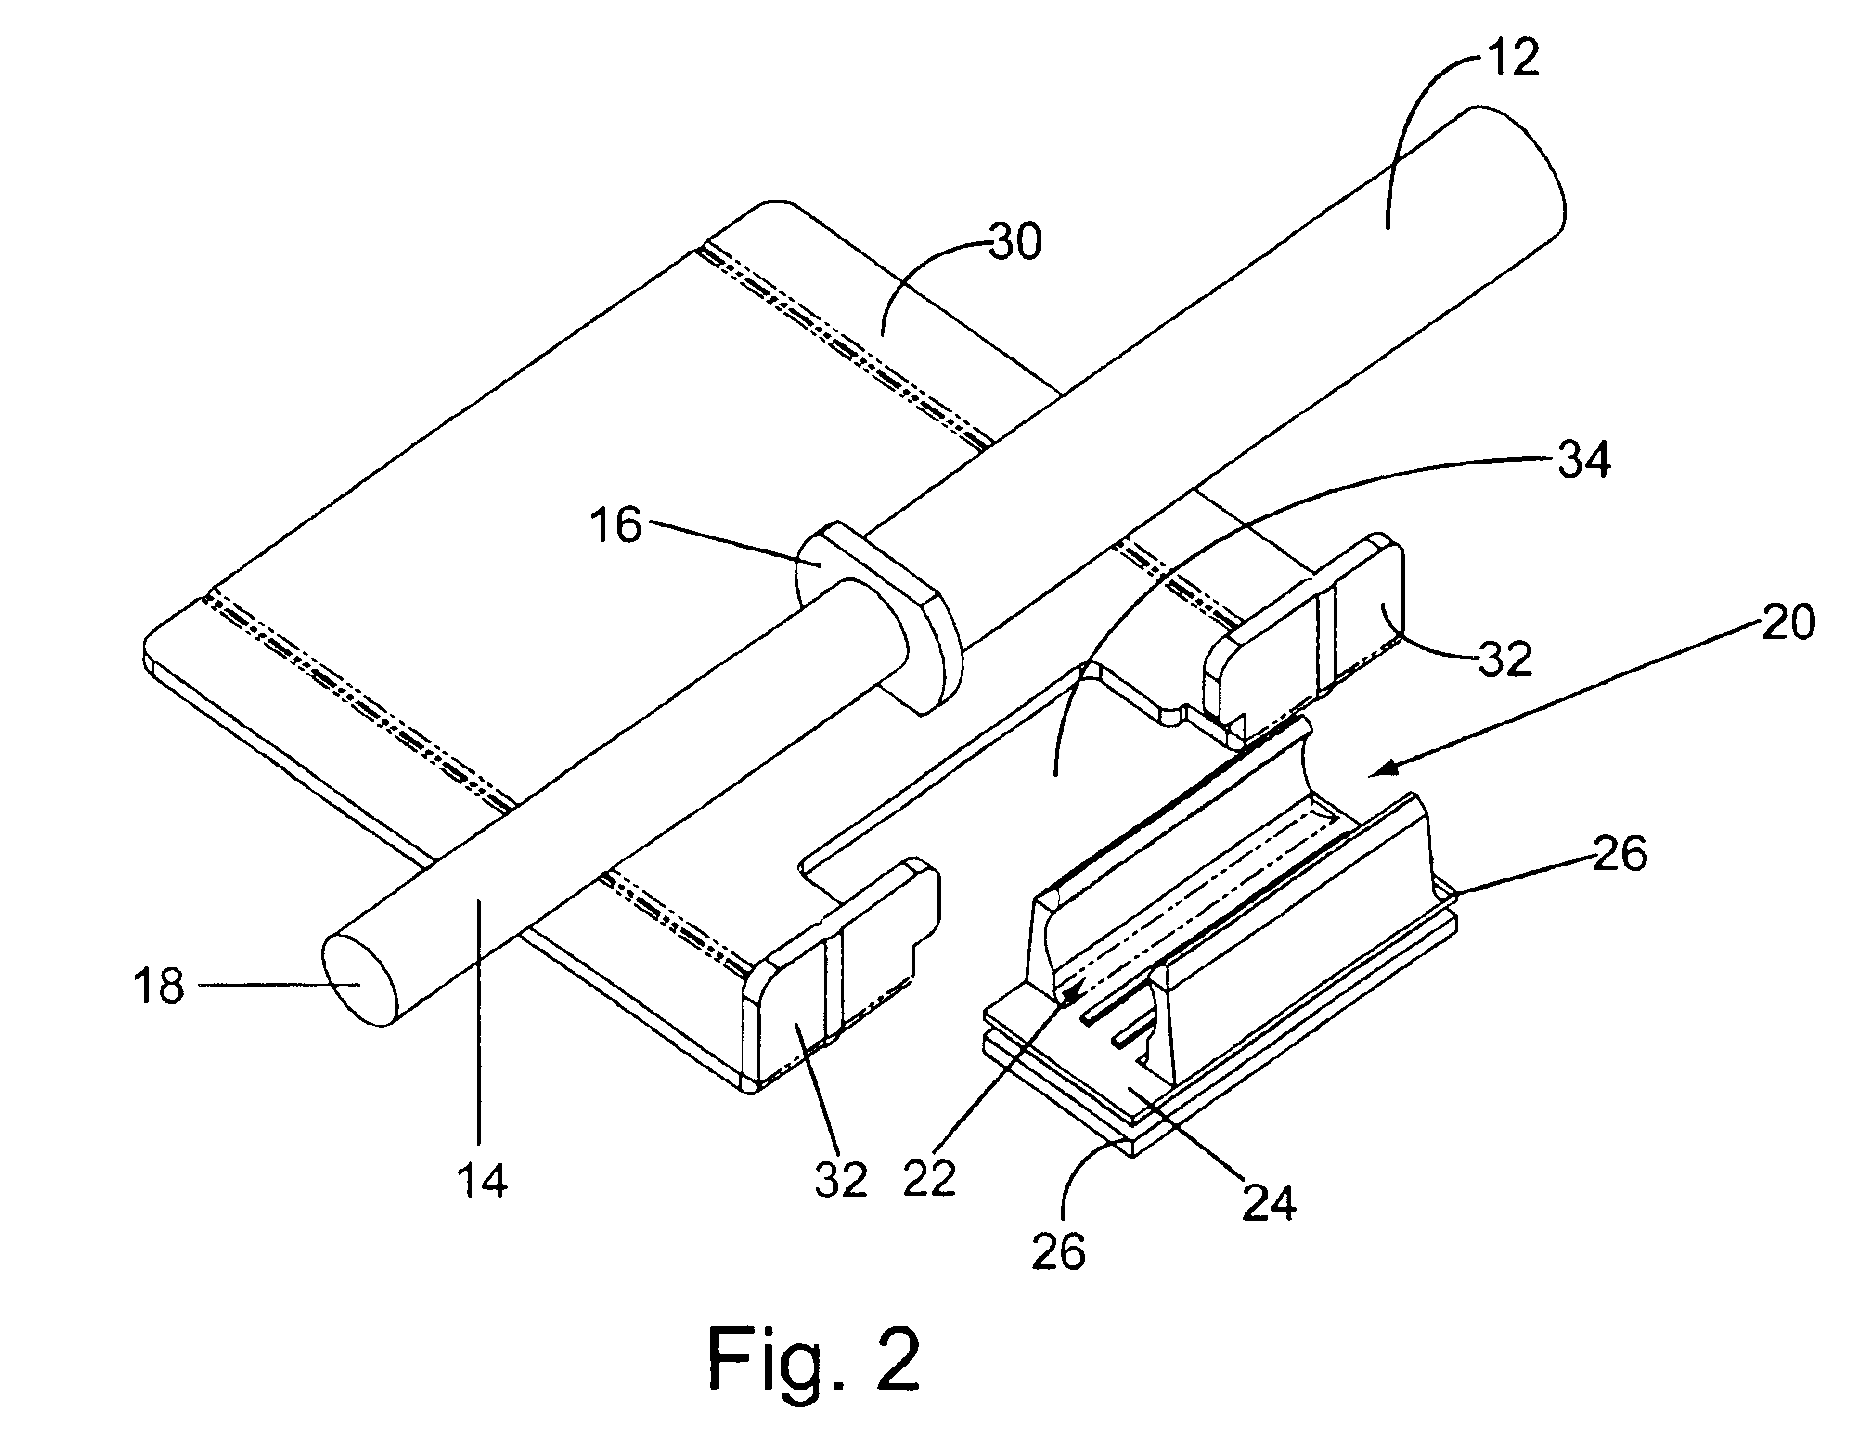 Shock absorber and mounting system for a drawer slide